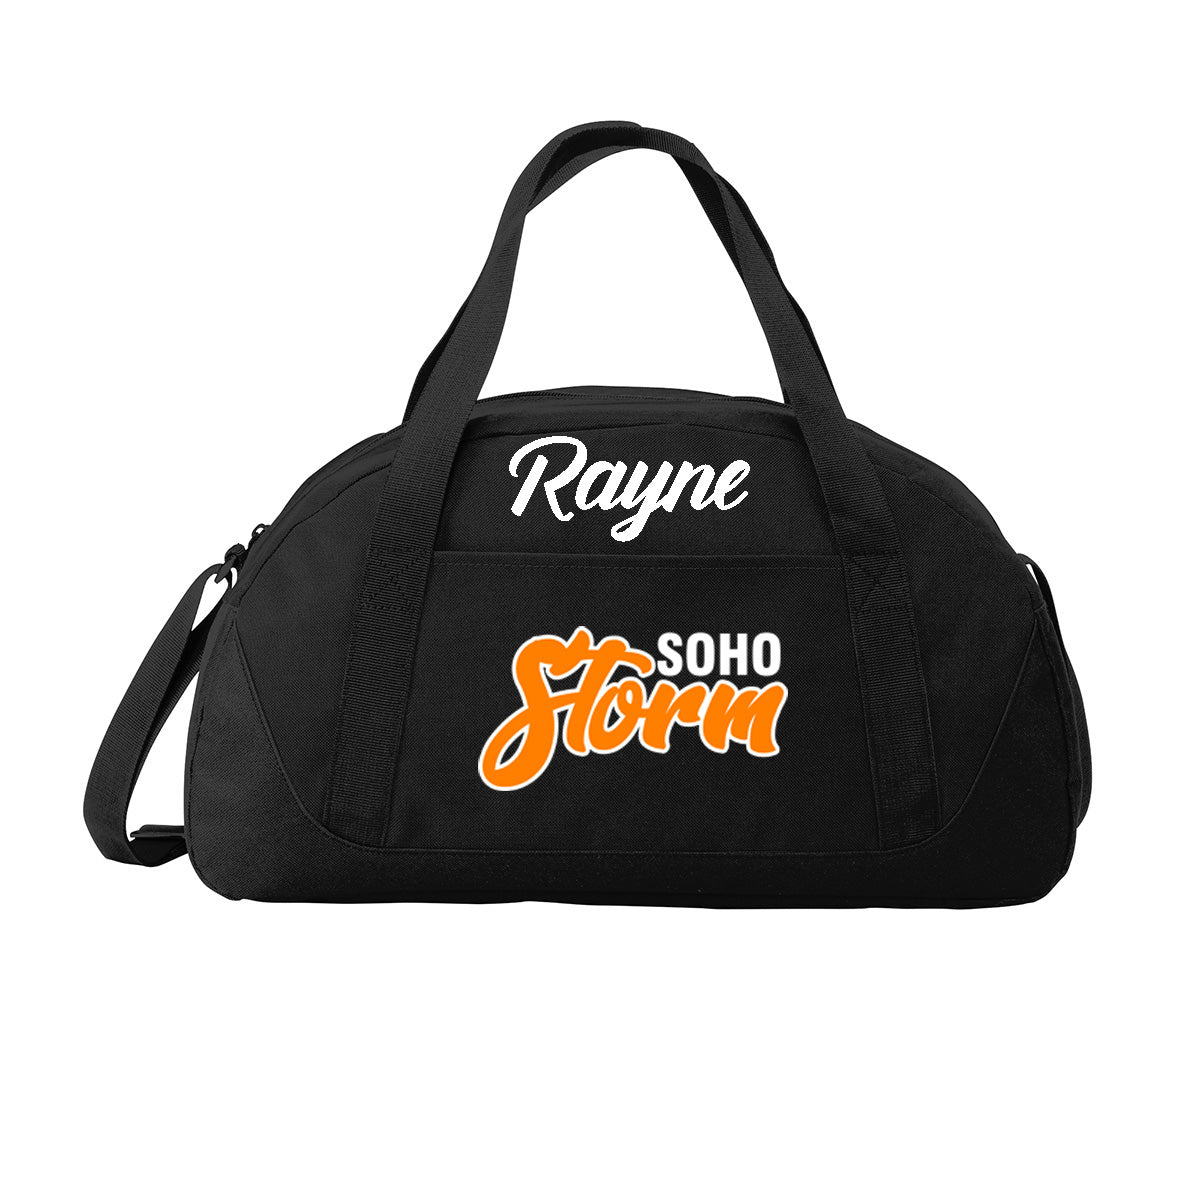 SOHO - Small Dome Duffle Bag with SOHO STORM (DOPESTYLE FONT) - Black (BG818) - Southern Grace Creations